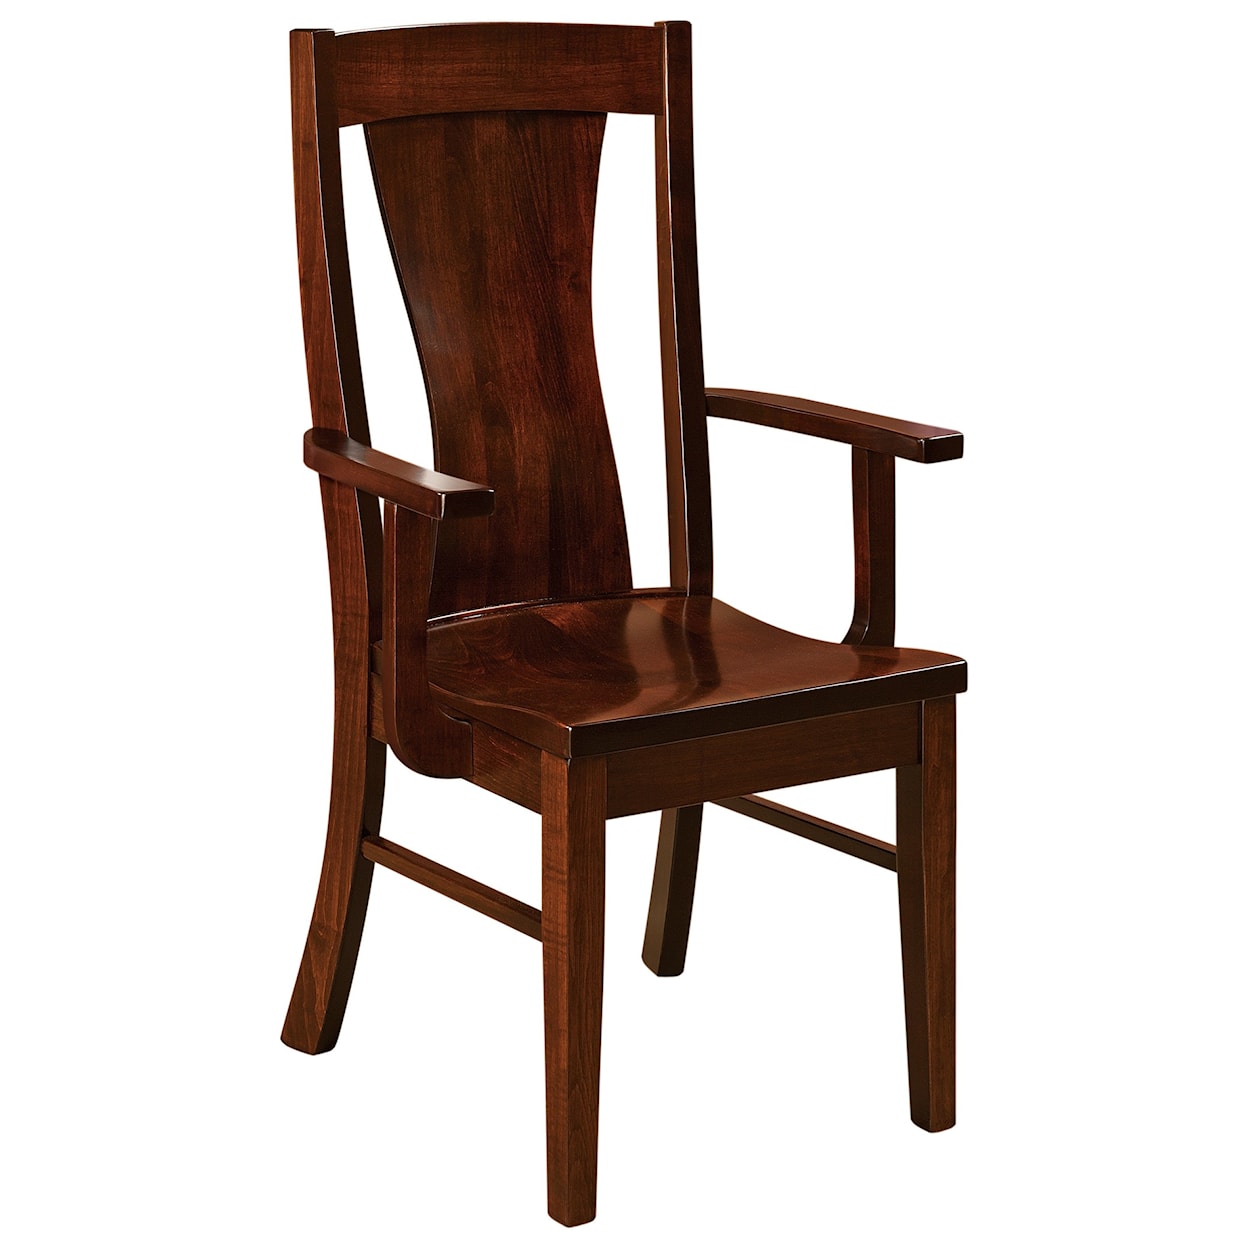 F&N Woodworking Westin Arm Chair - Leather Seat